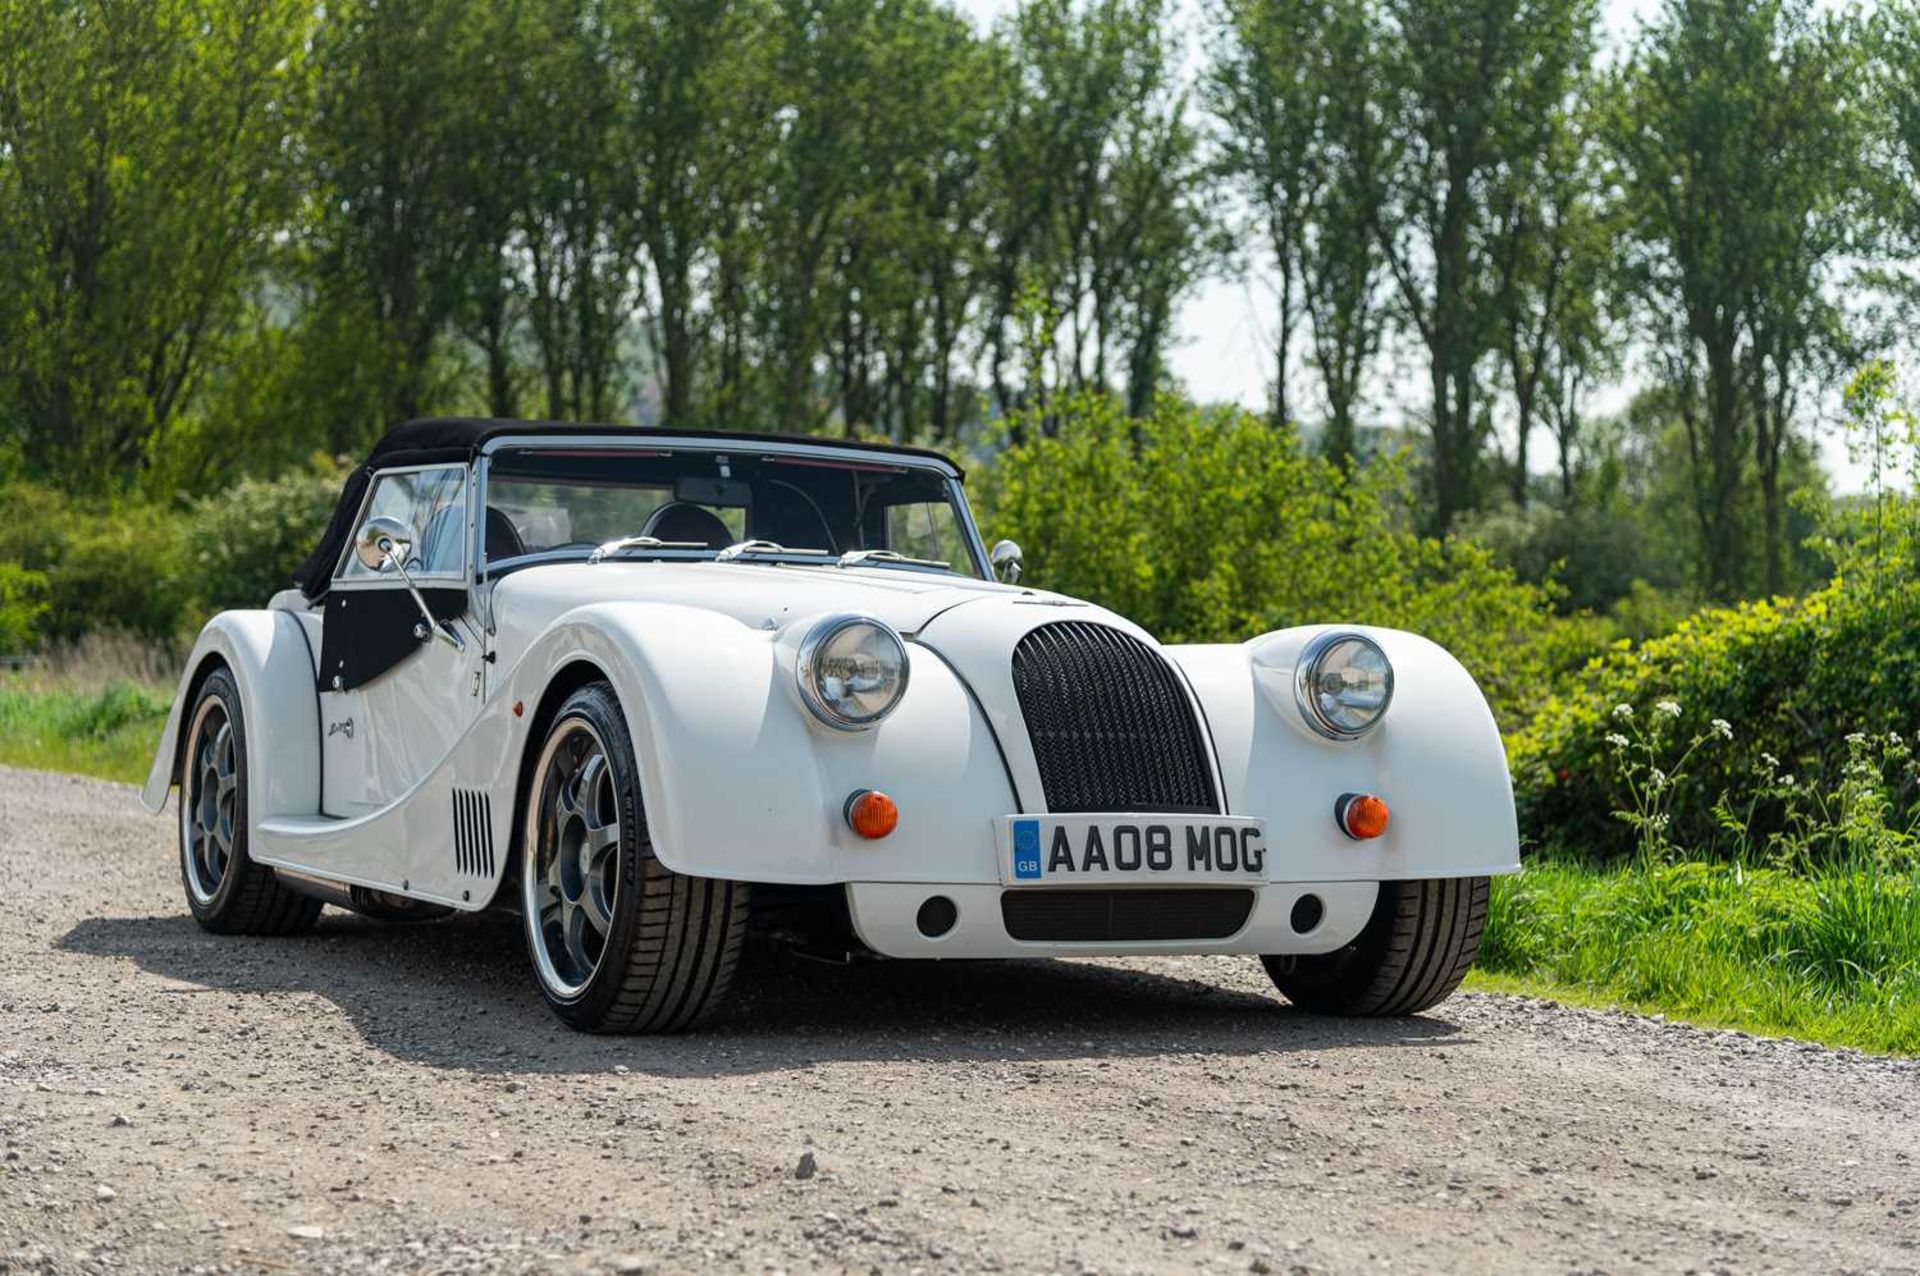 2012 Morgan Plus 8 ***NO RESERVE*** Believed to be one of just 60 produced and with MOT records supp - Image 5 of 74